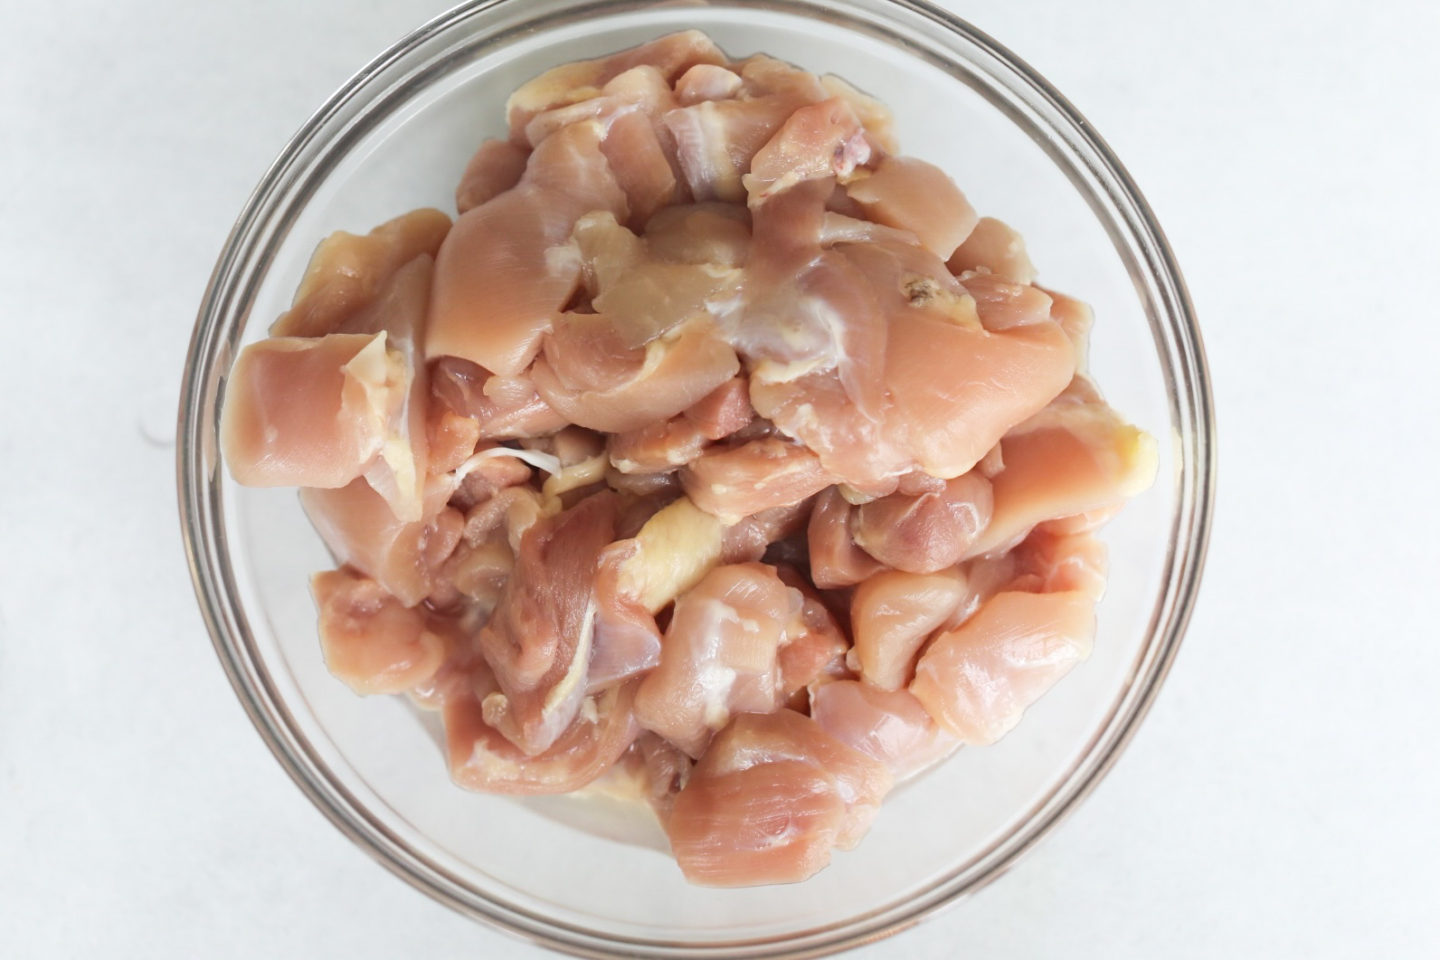 Uncooked Chicken Thighs in a clean bowl sliced in bite sized pieces for spicy chicken teriyaki recipe.